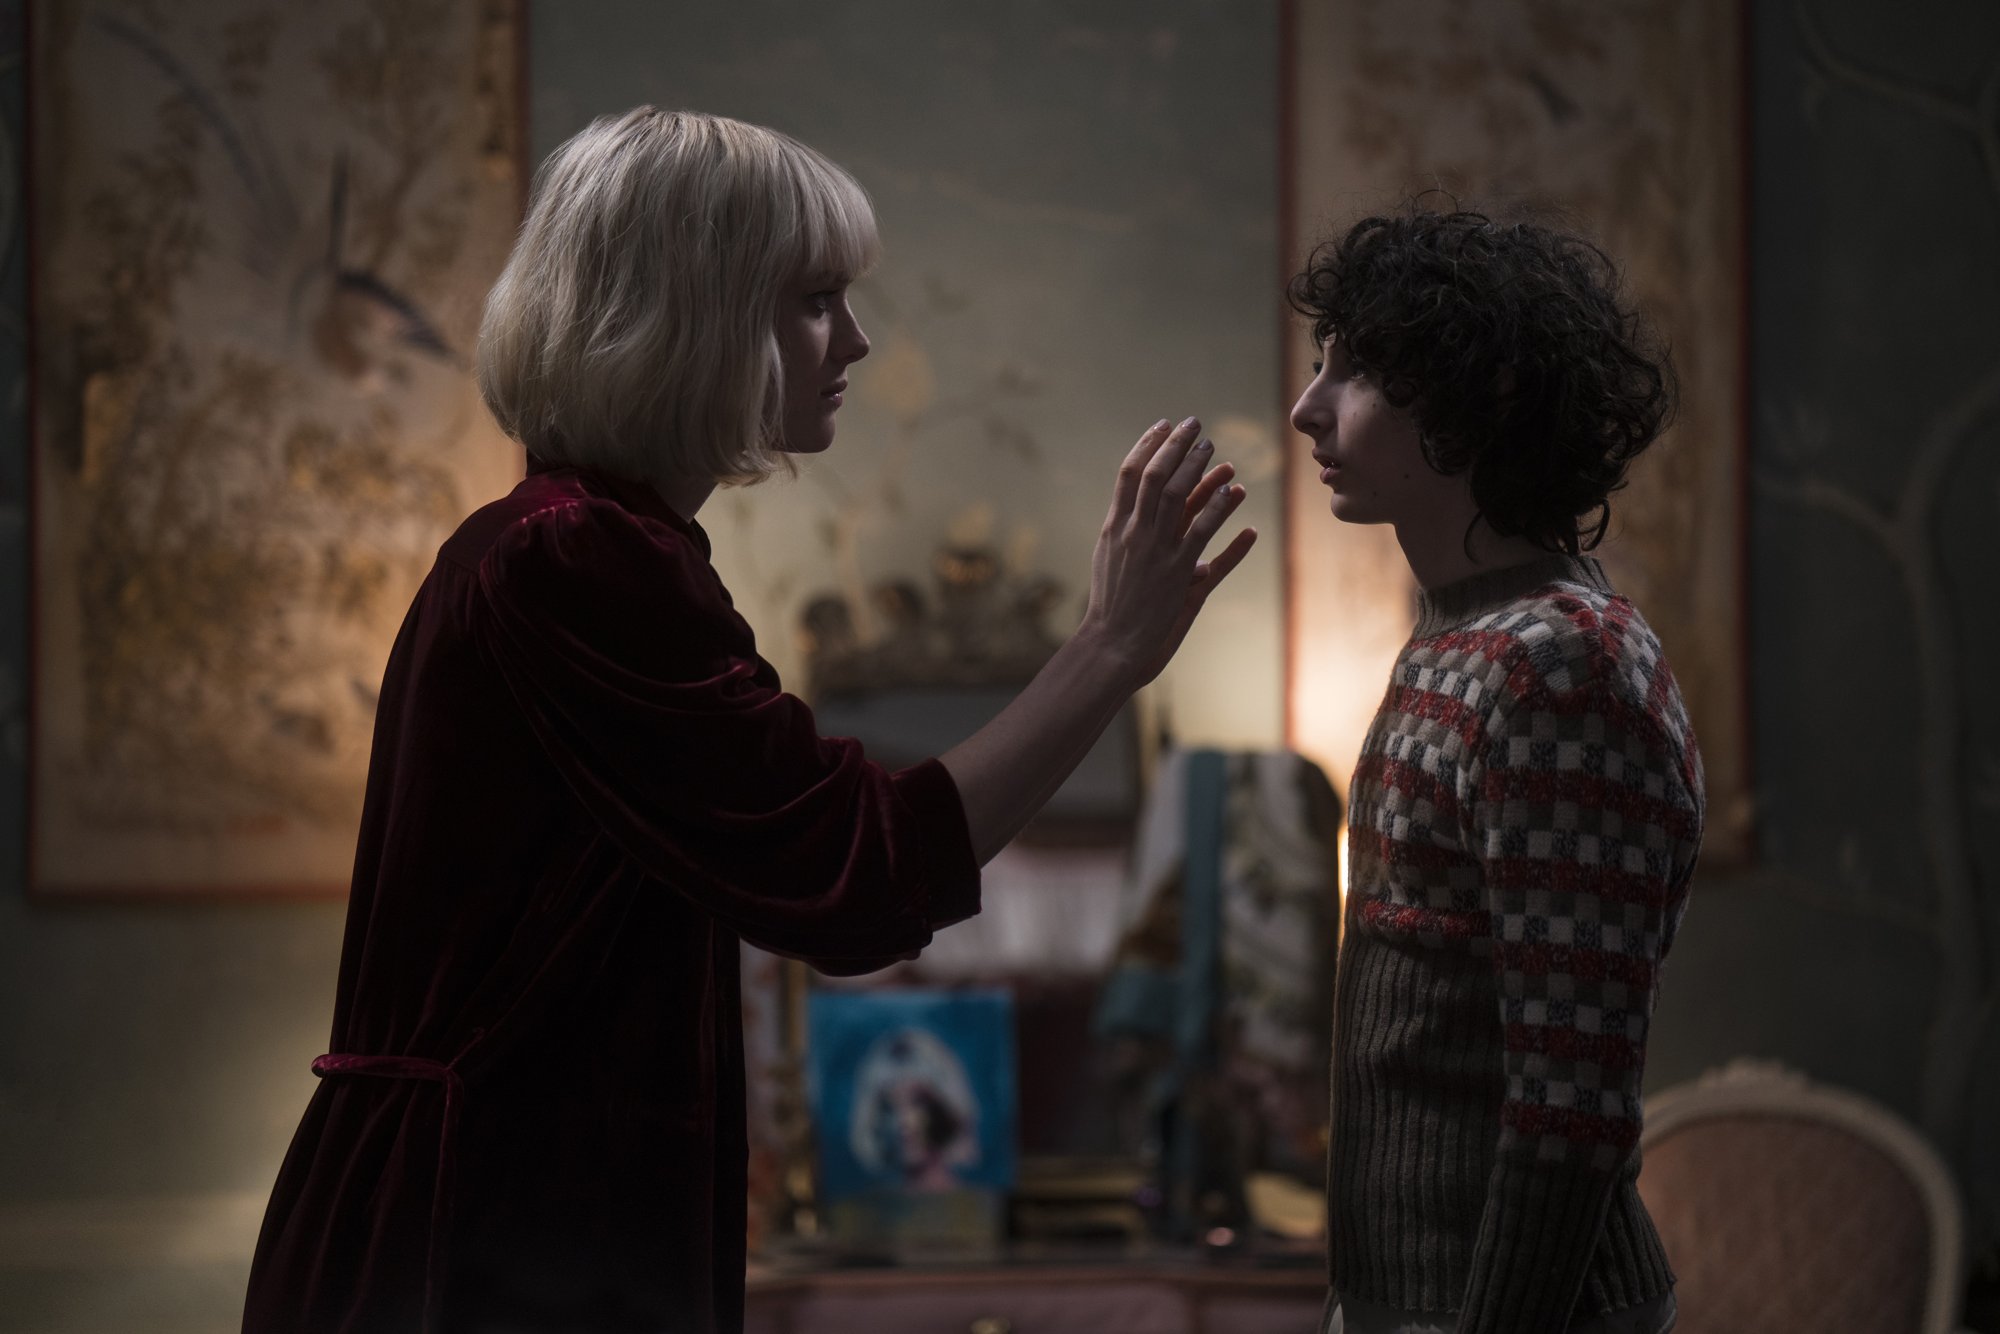 Mackenzie Davis stars as Kate and Finn Wolfhard stars as Miles in Universal Pictures' The Turning (2020)